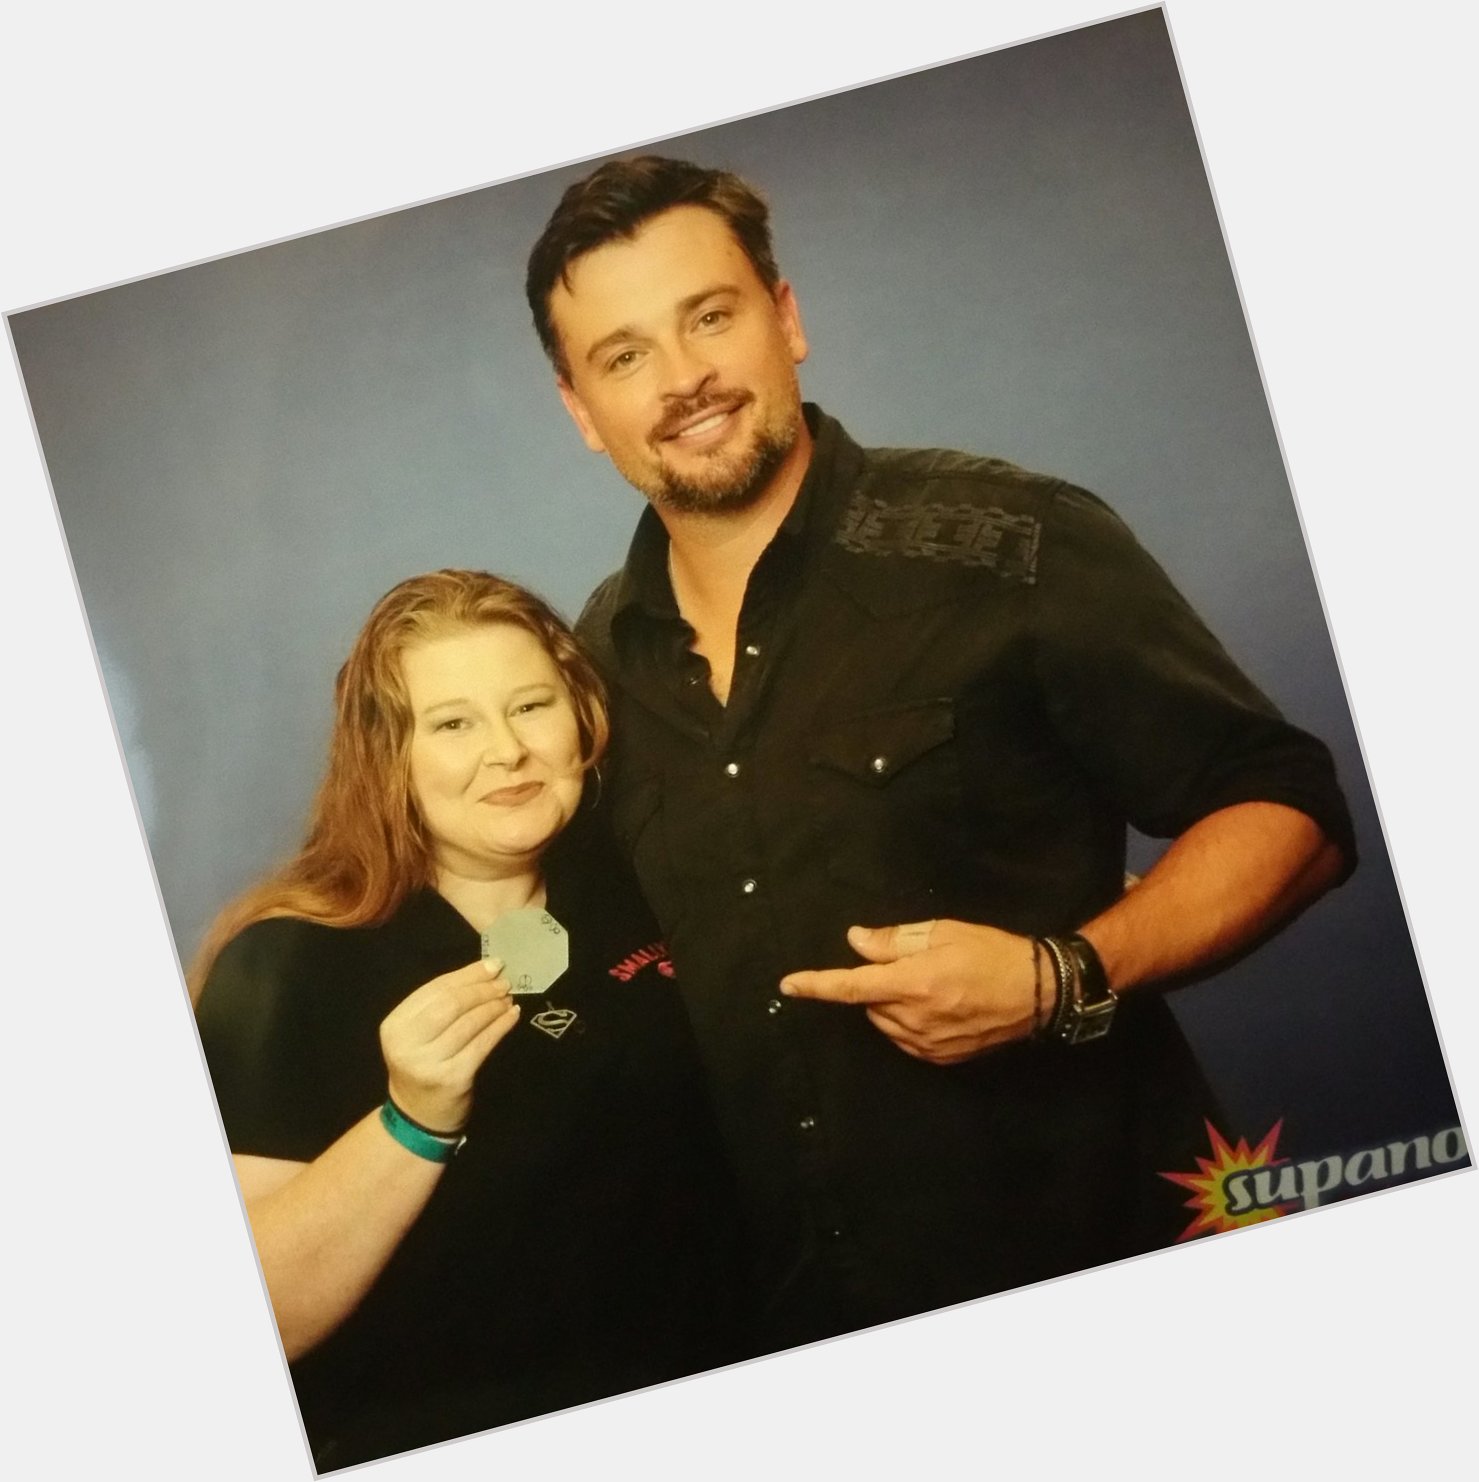 Happy Birthday Tom welling, here\s a throwback to last year 